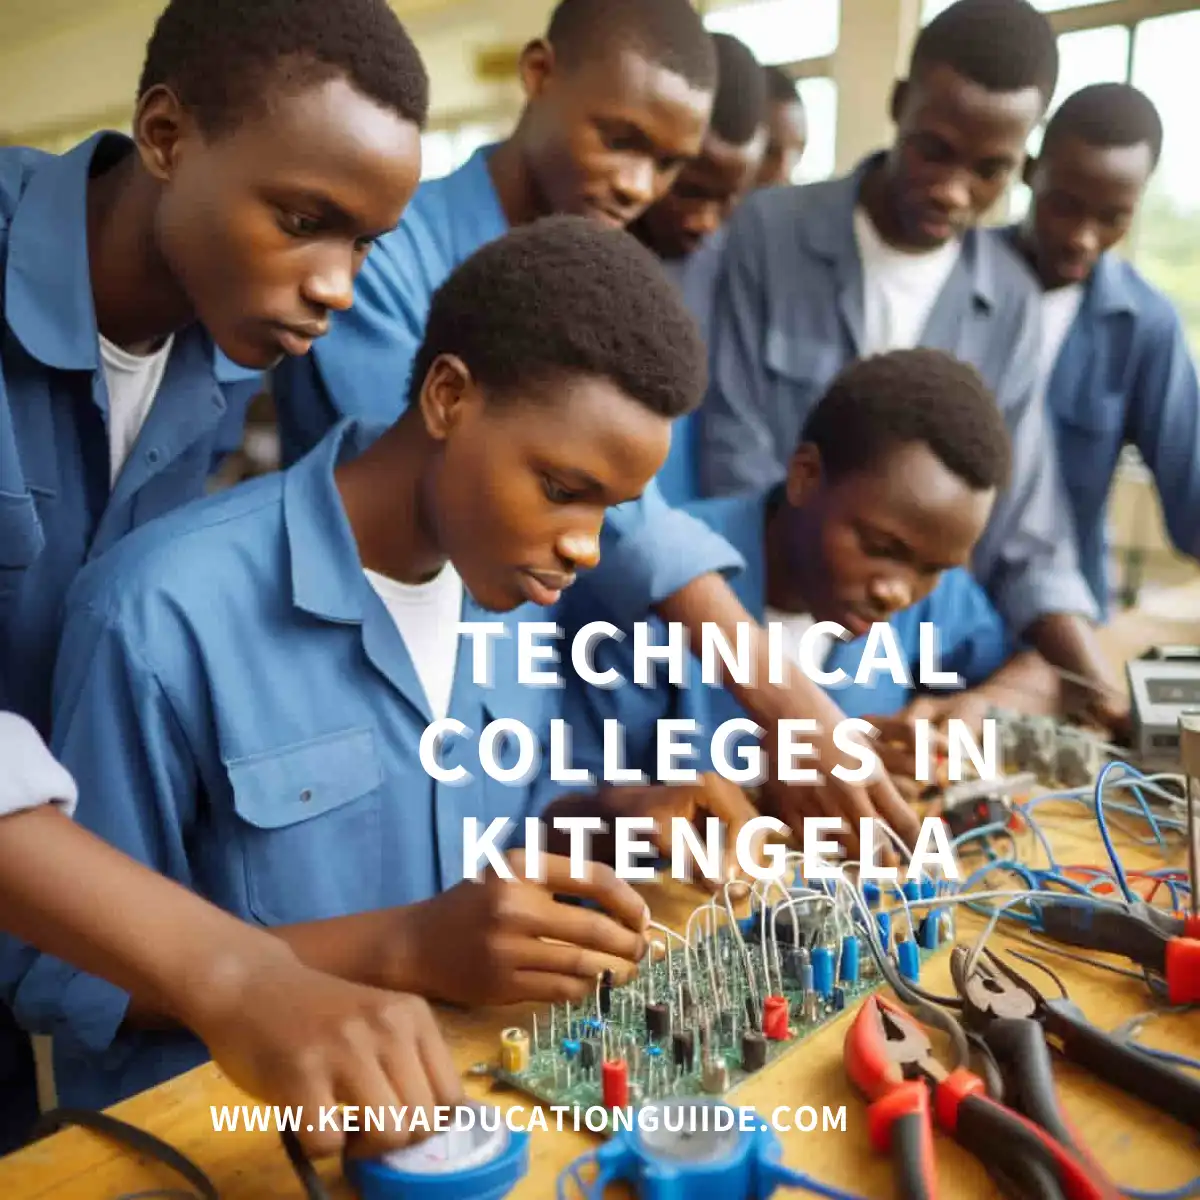 Technical Colleges in Kitengela